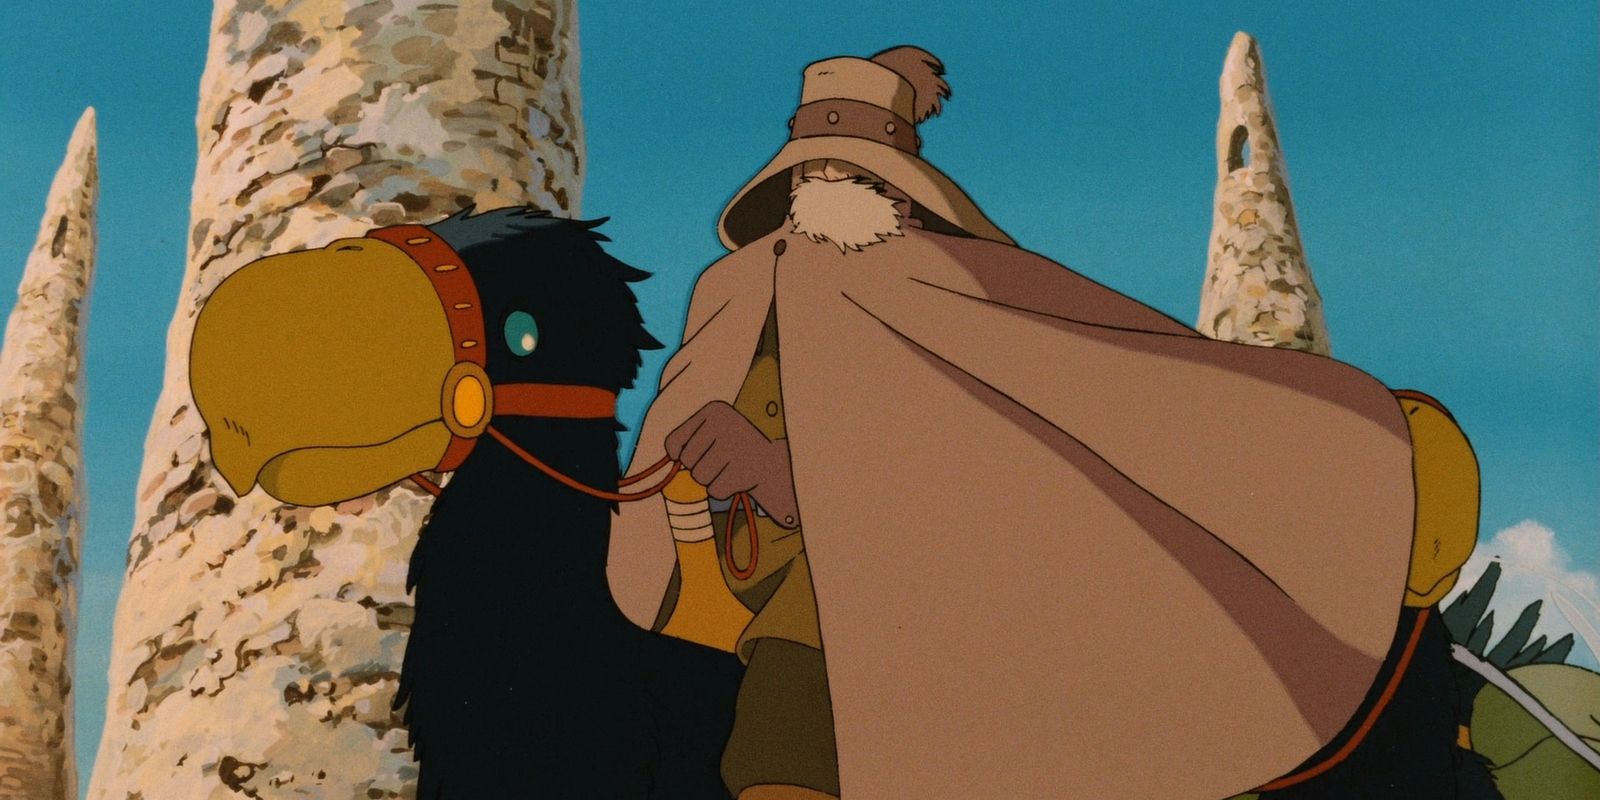 Lord Yupa in Nausicaa and The Valley of the Wind